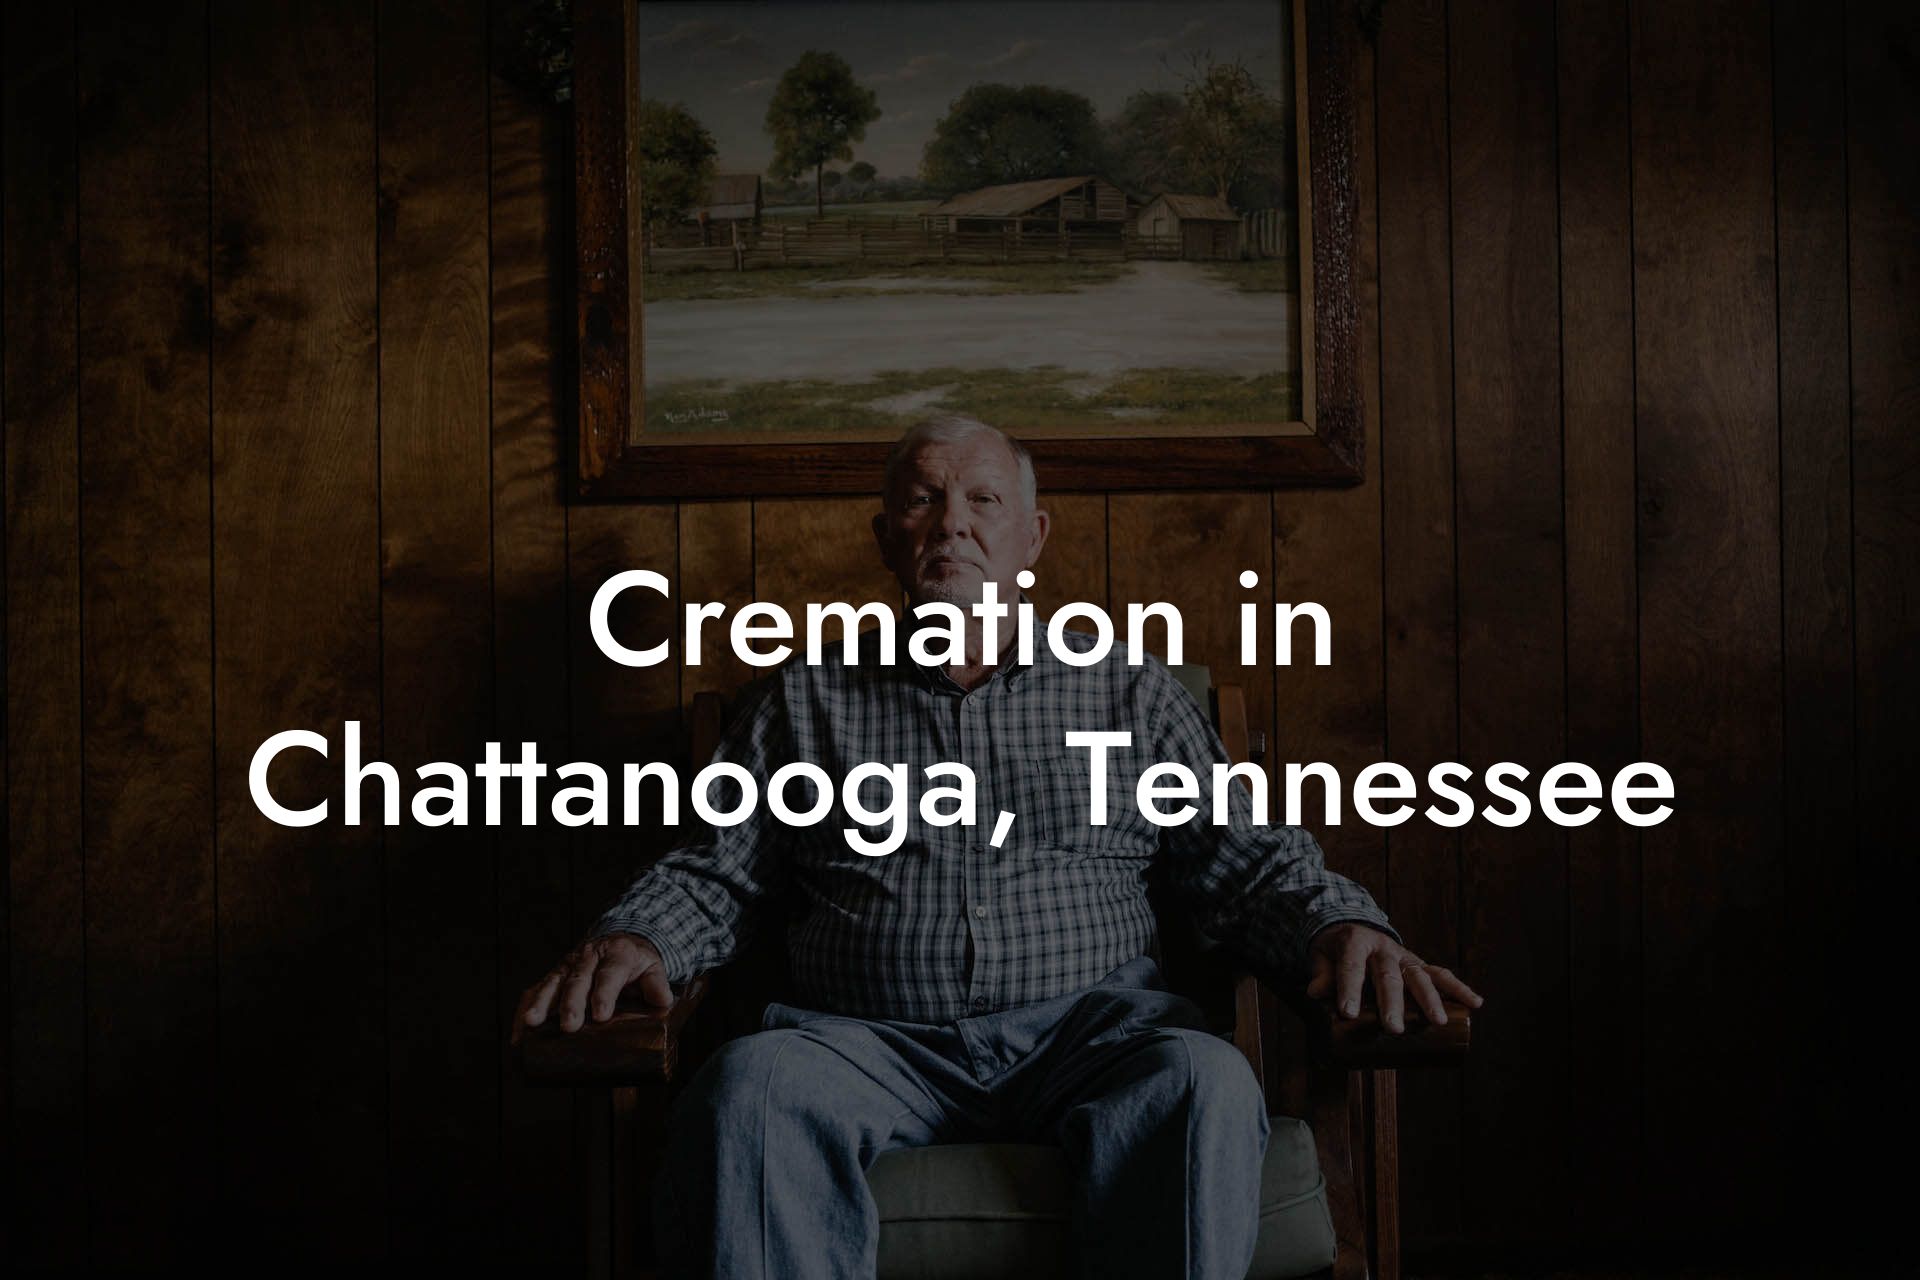 Cremation in Chattanooga, Tennessee